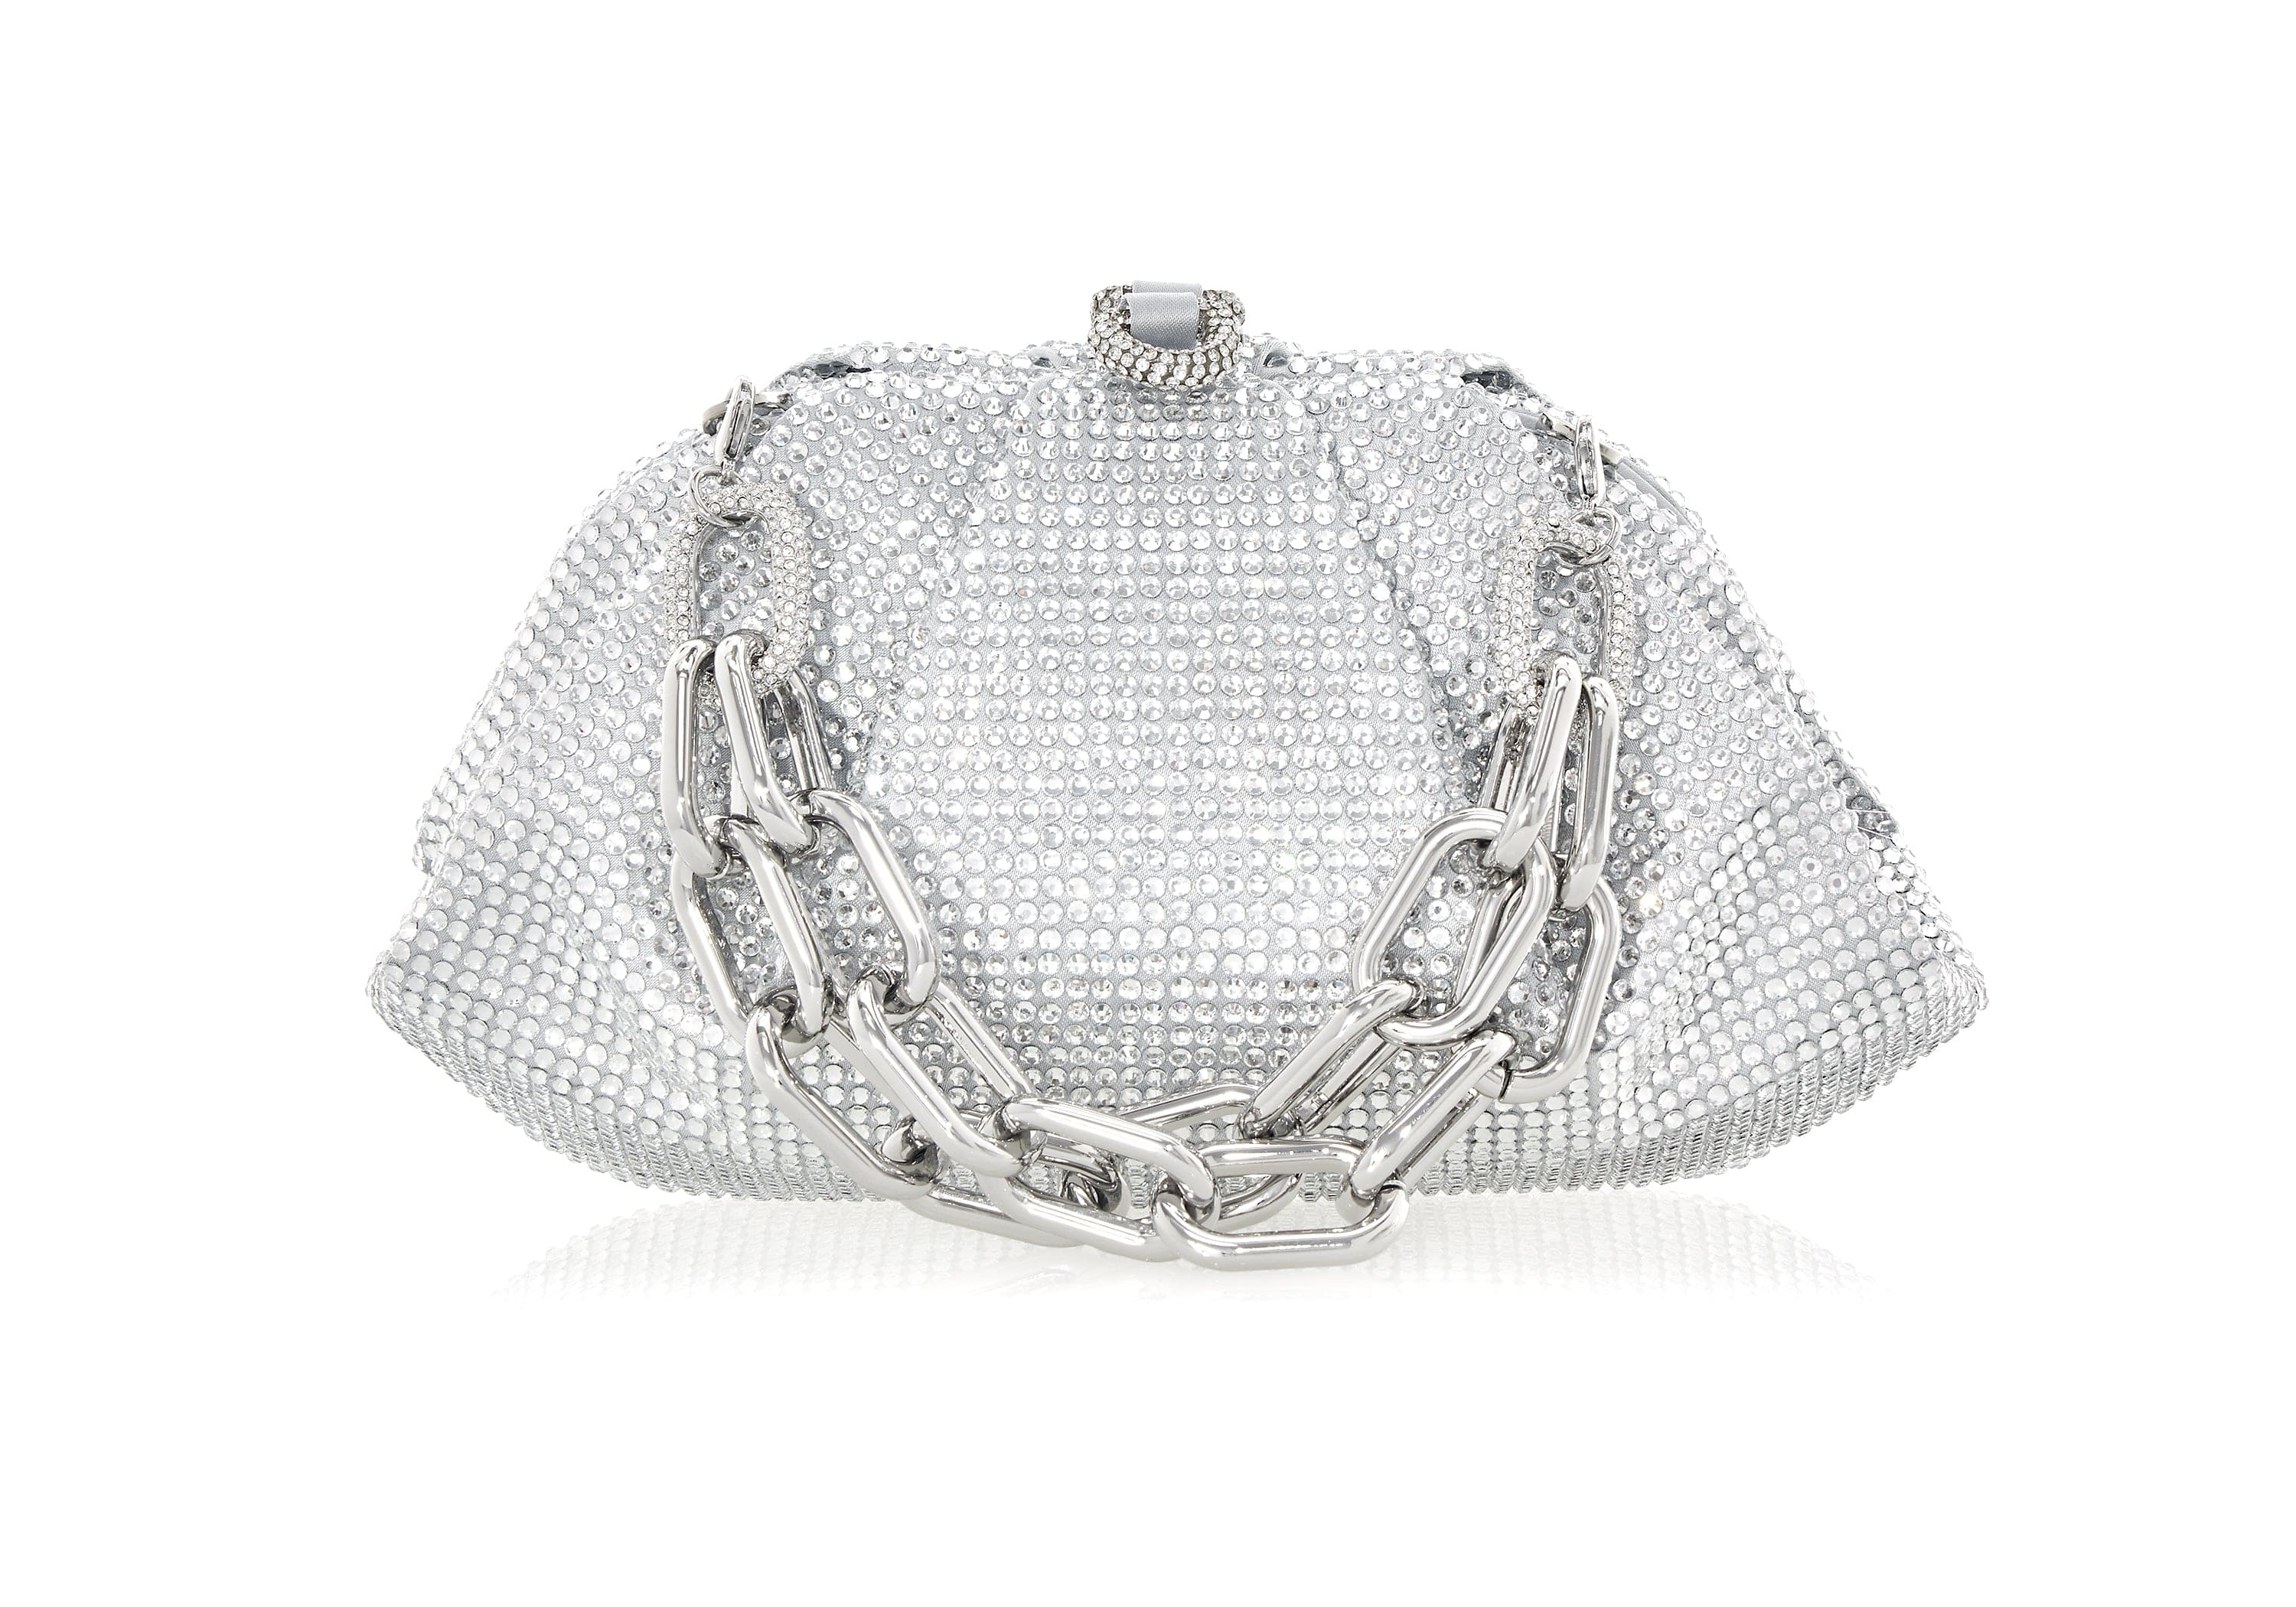 Judith Leiber Couture Bow Crystal Top-Handle Bag